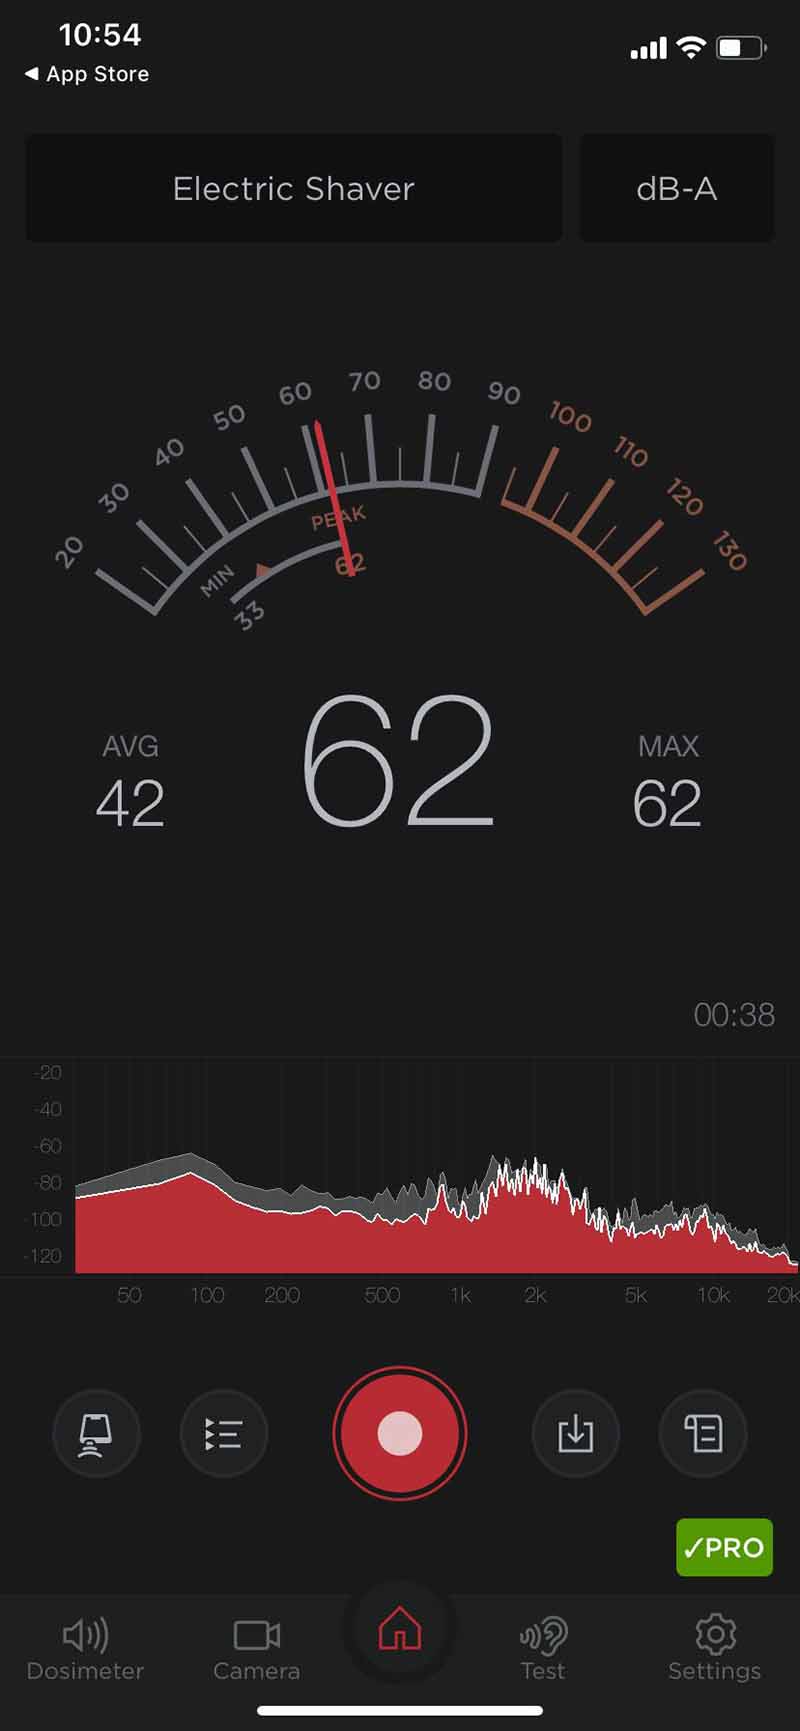 The measured Sound level in my app